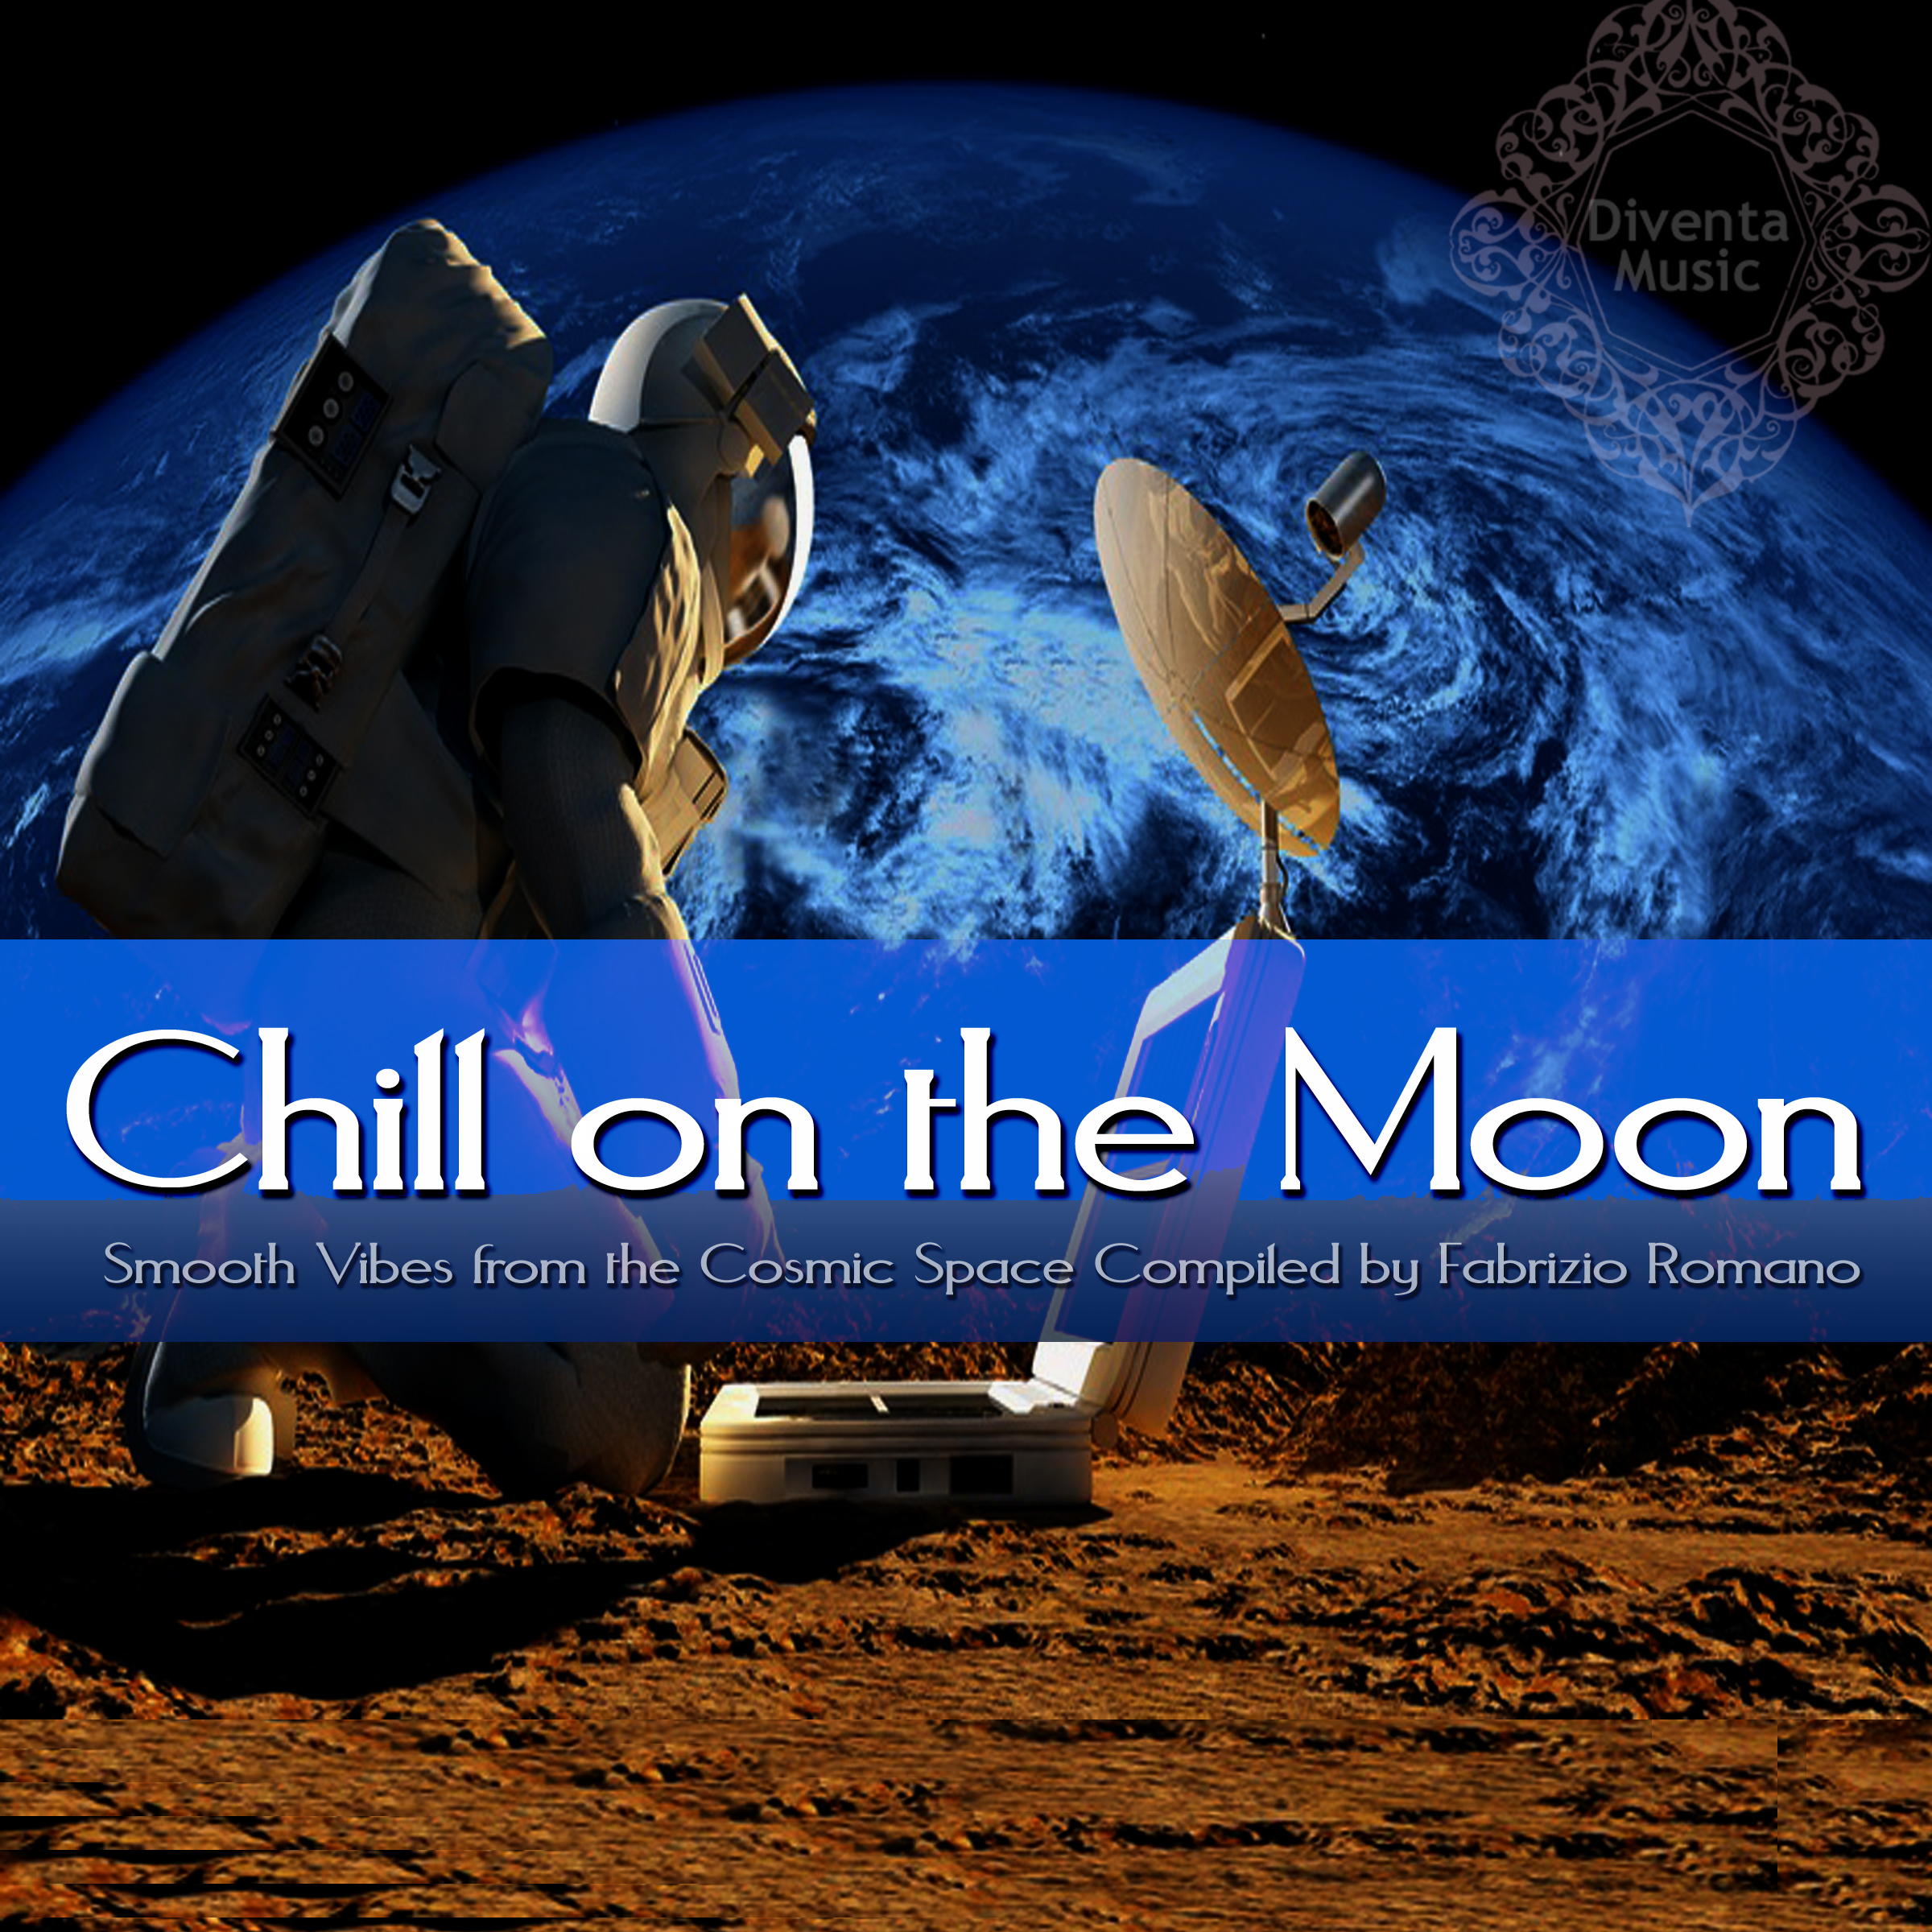 Chill On the Moon - Smooth Vibes from the Cosmic Space (Compiled By Fabrizio Romano)